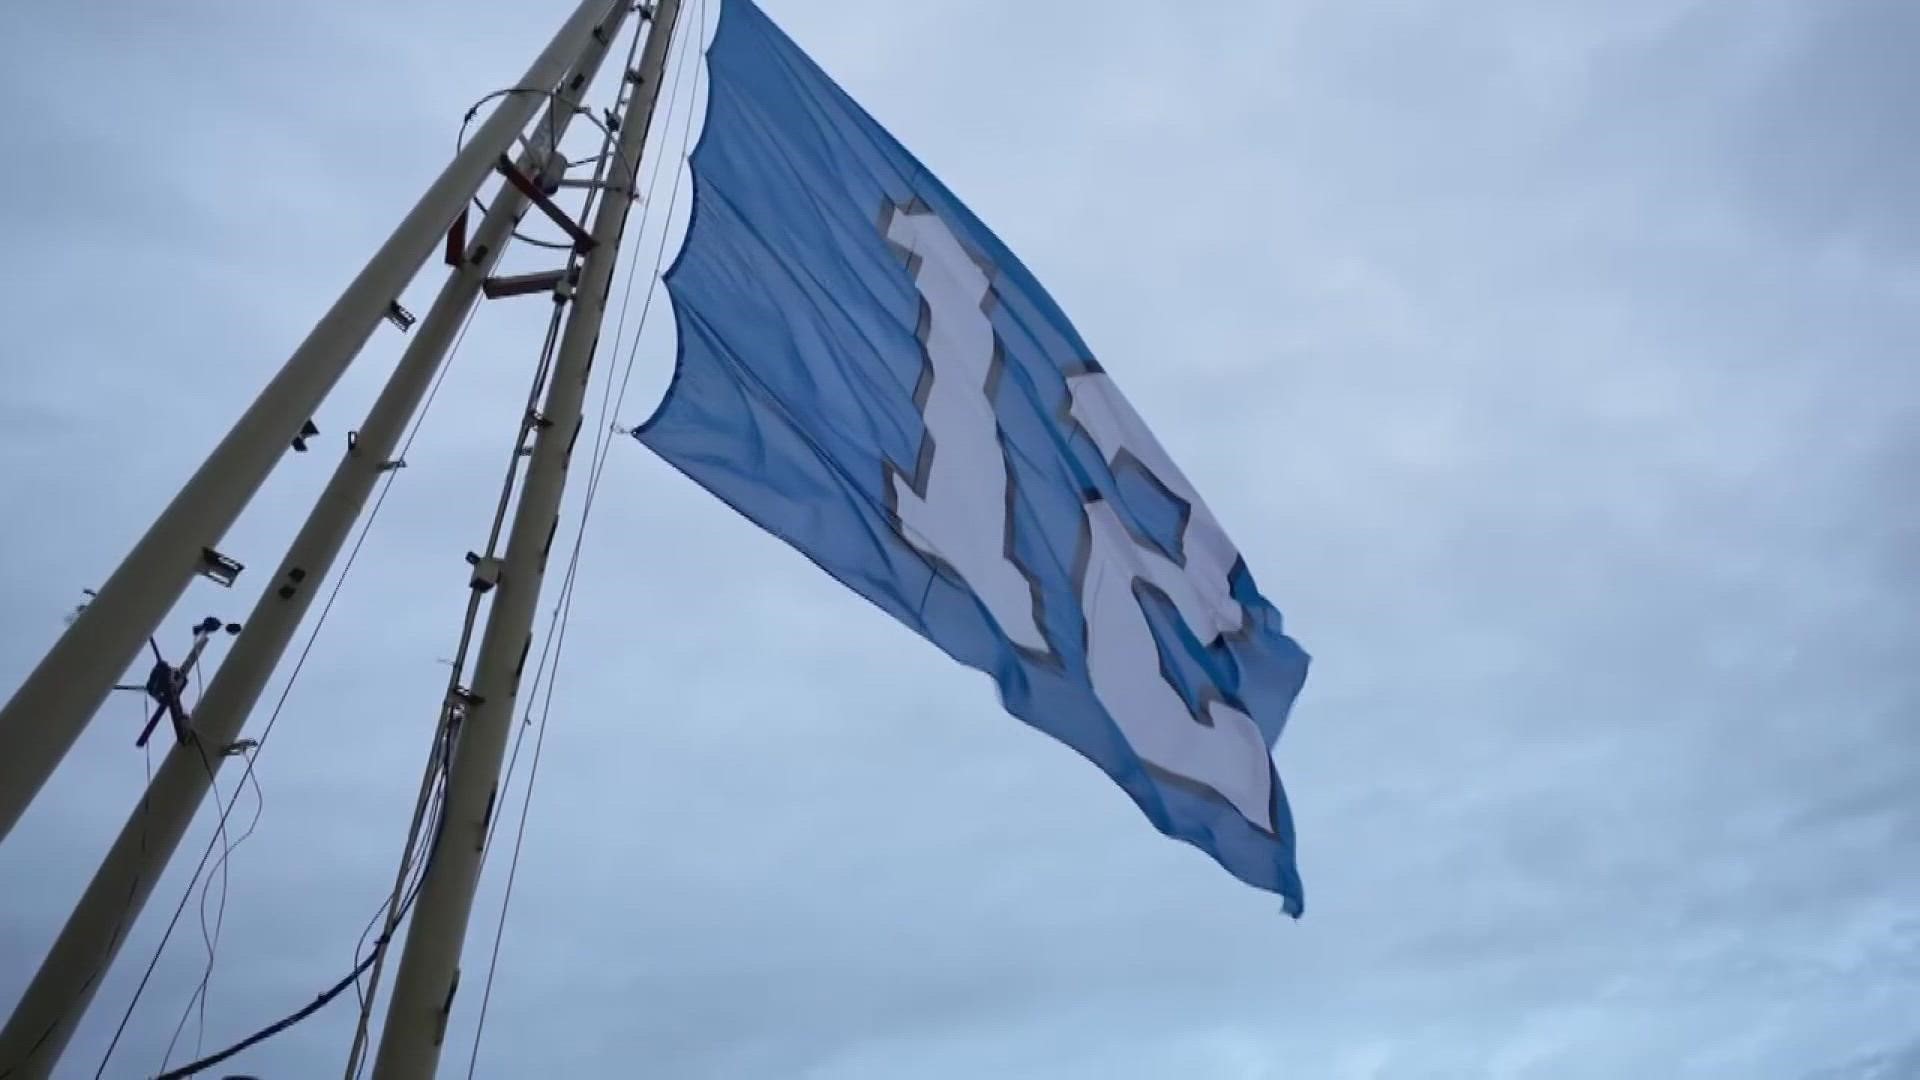 Representatives from the Seahawks, the Seattle Storm, OL Reign and the Seattle Mariners helped raise the flag above the Emerald City's most iconic attraction.